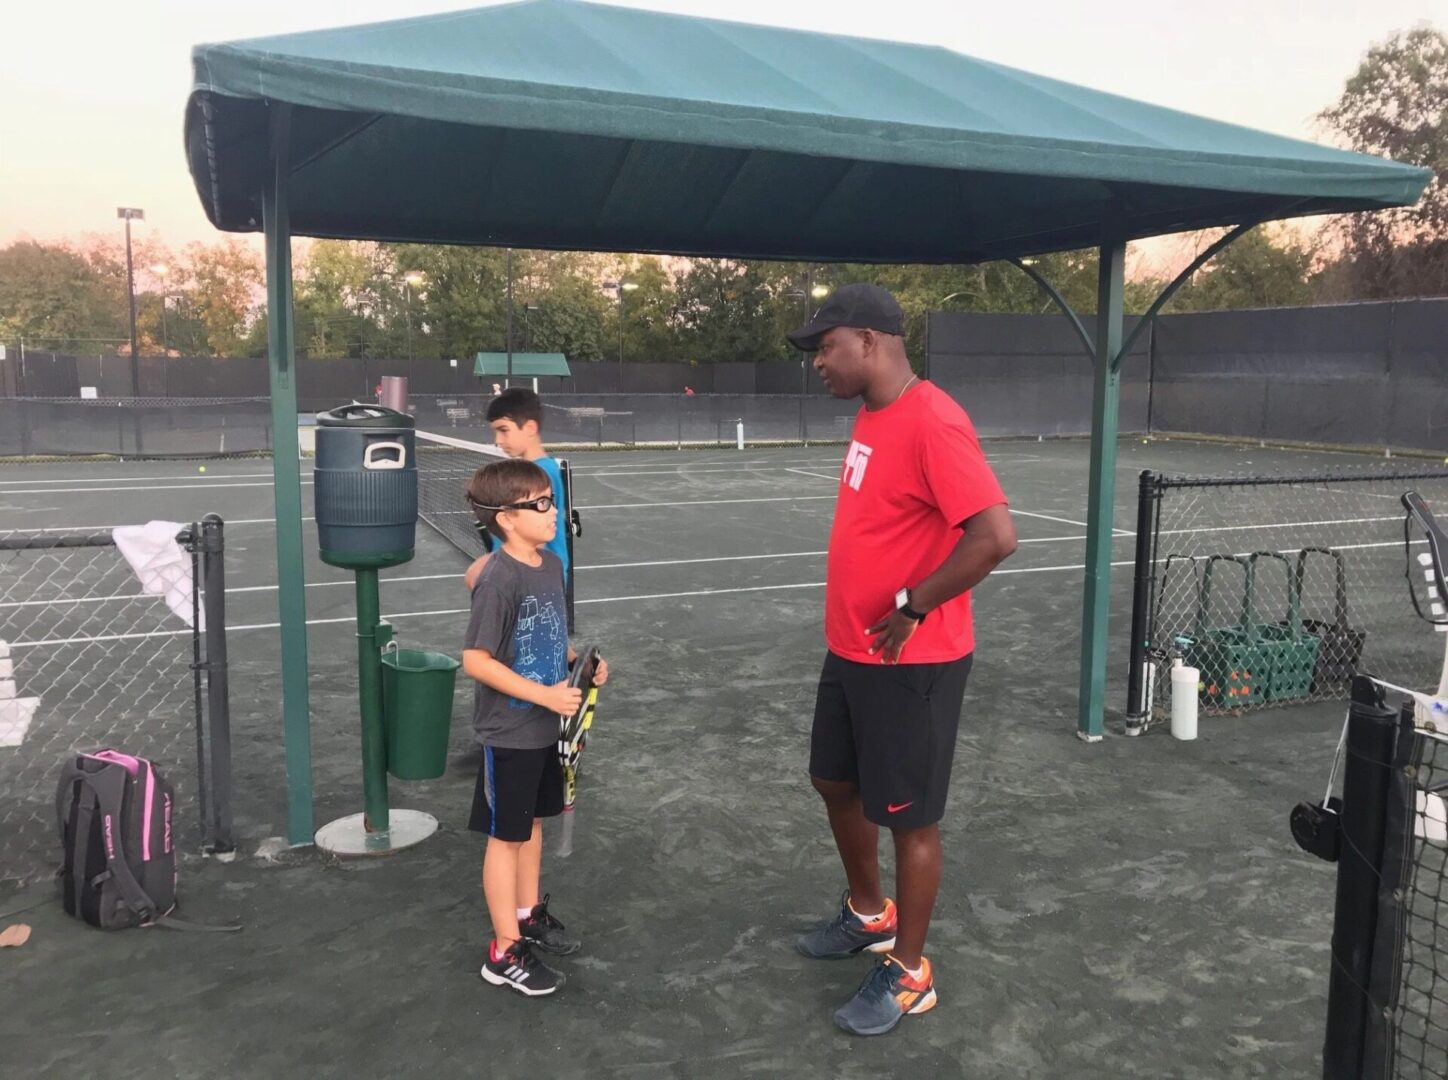 A man and boy are standing on the tennis court.